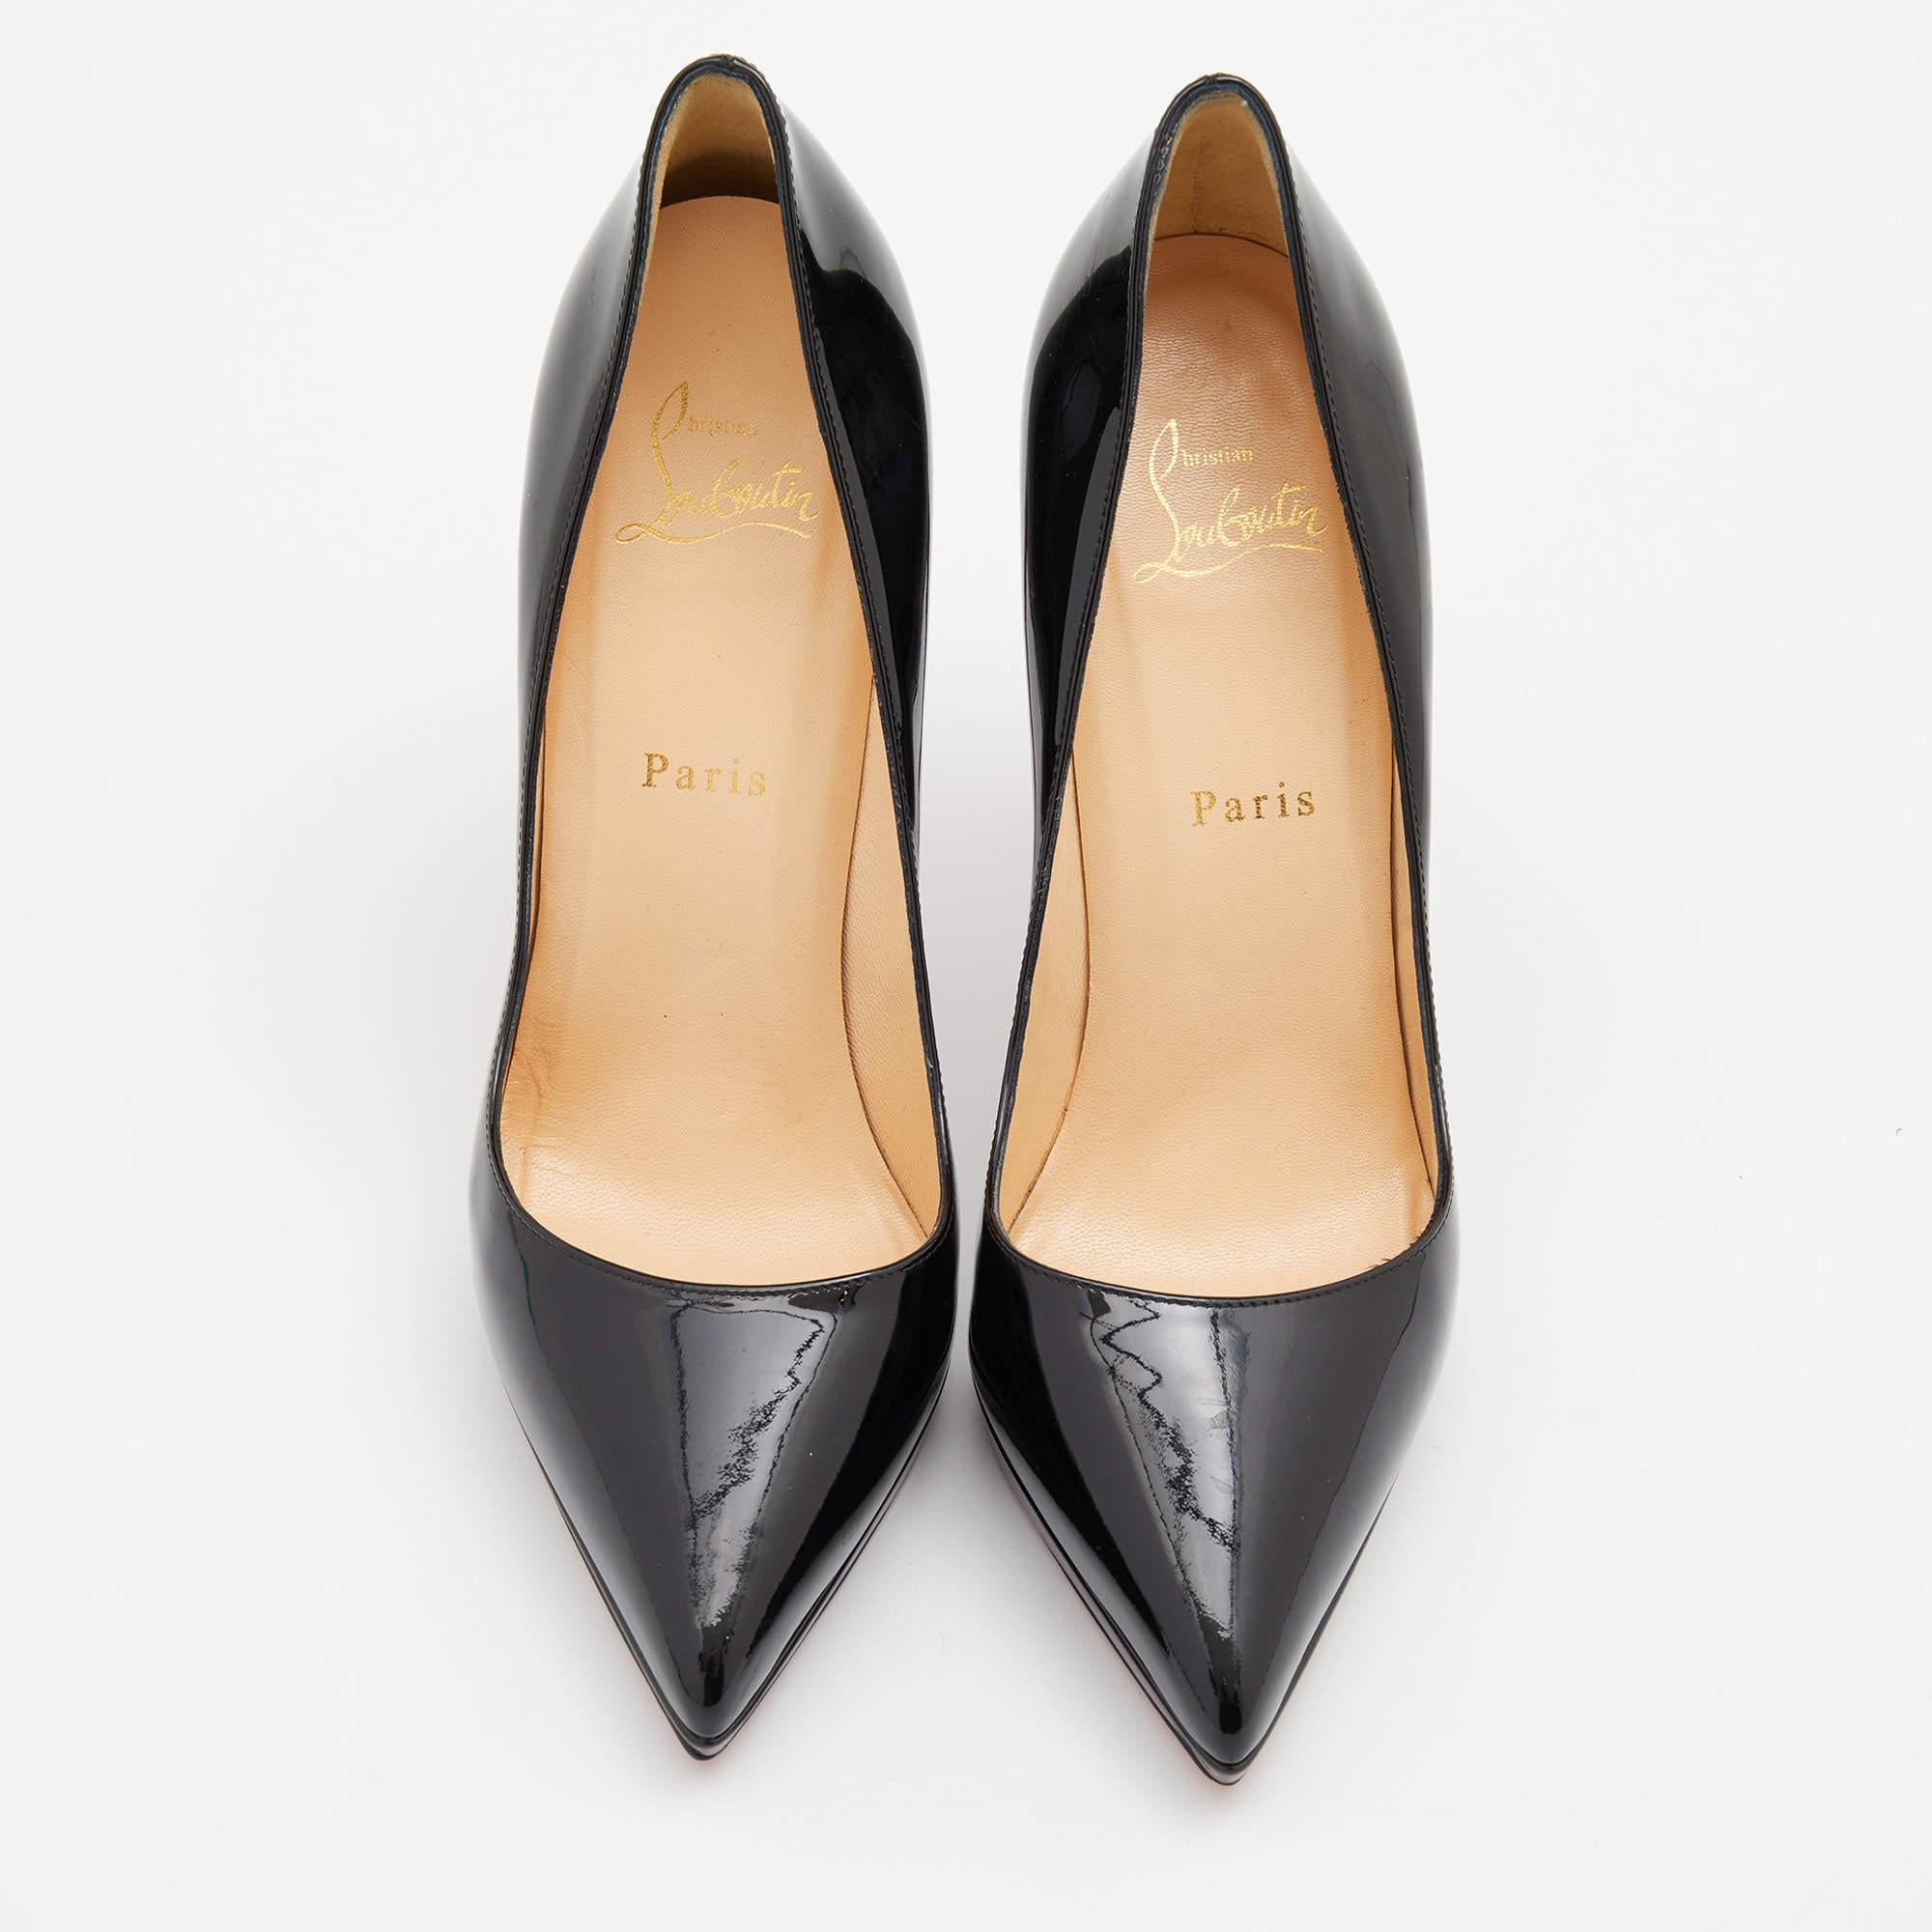 These pumps are a great choice if you’re looking to add a pair that's both classy and versatile. The pair has been made using only the best kind of materials to ensure lasting wear.

